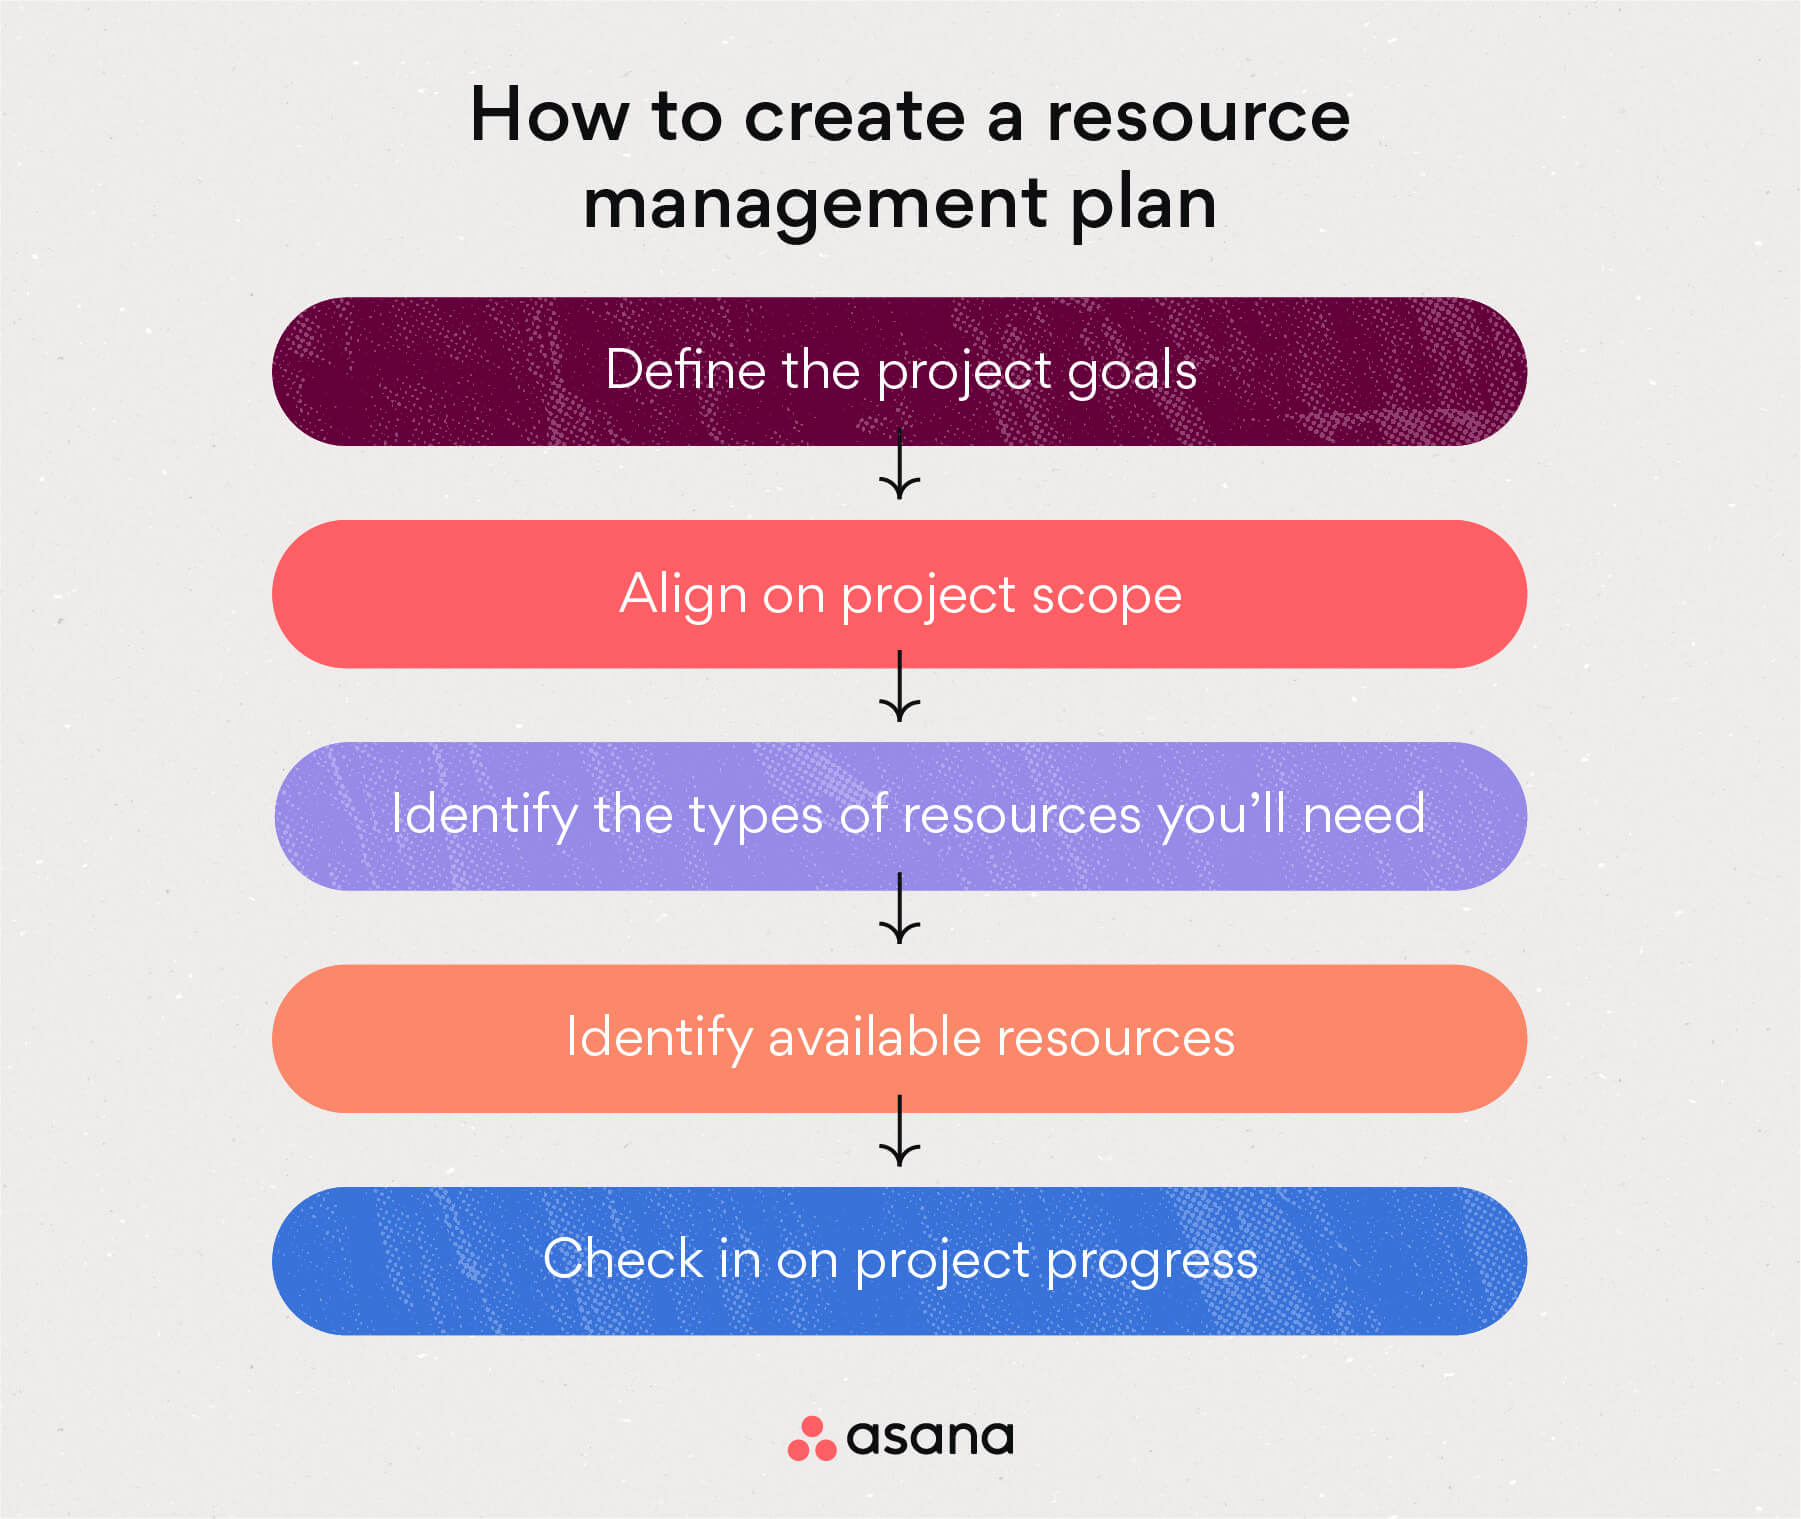 [inline illustration] How to create a resource management plan (infographic)